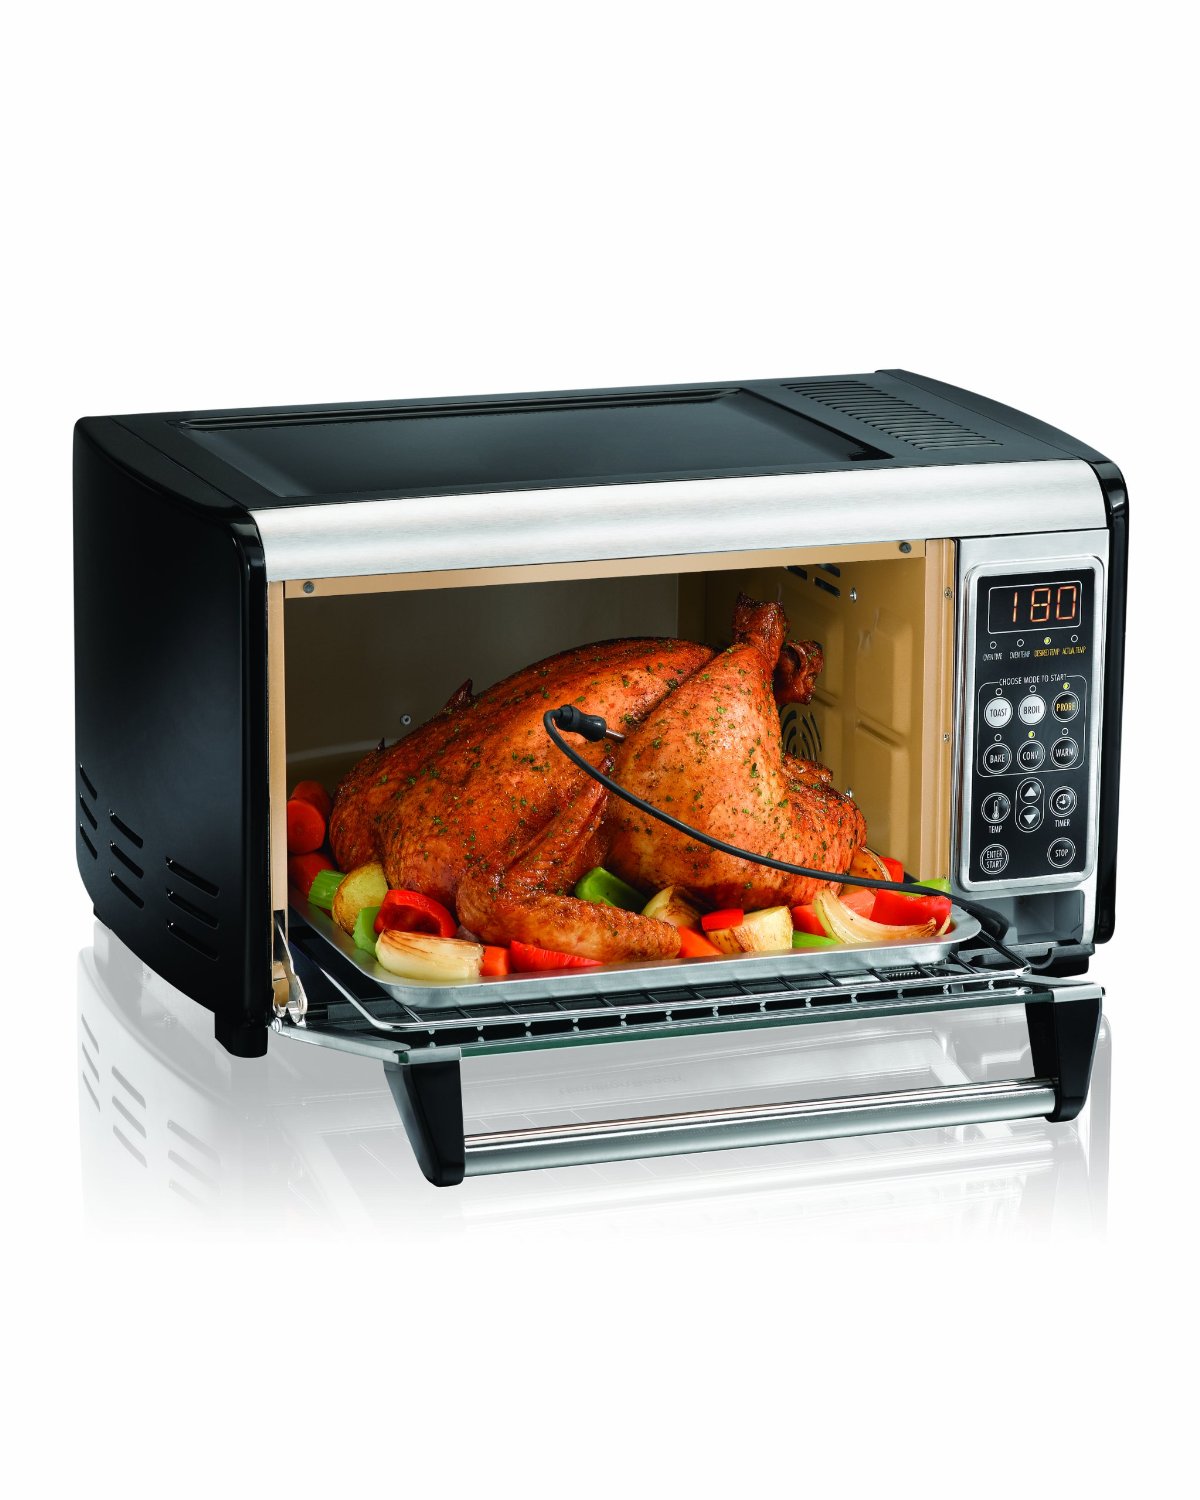 Hamilton Beach 31230 Set & Forget Toaster Oven with Convection Cooking